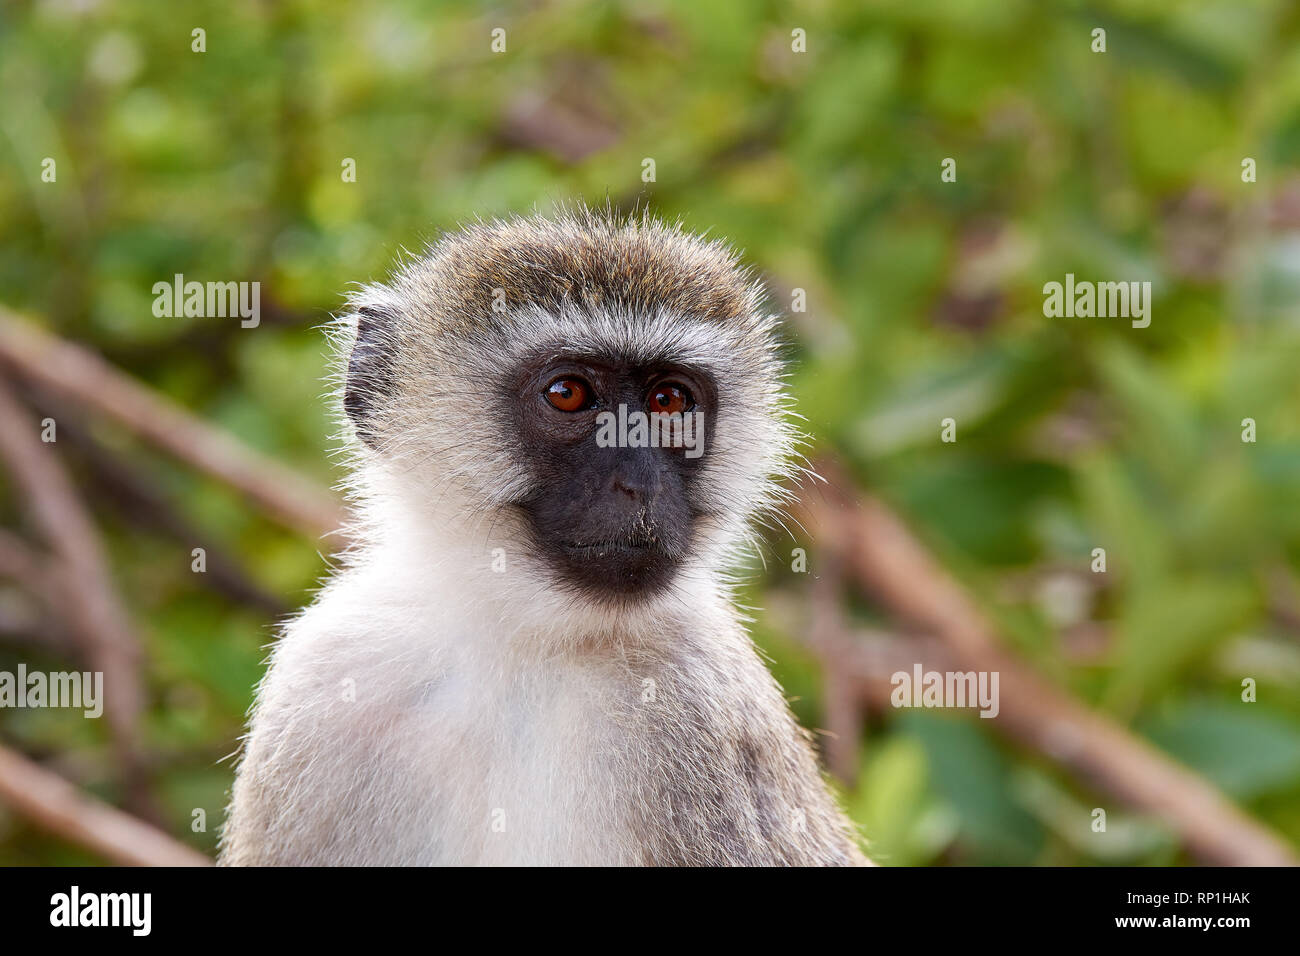 Close-up view of head and face of monkey, with blurred trees in the background Stock Photo